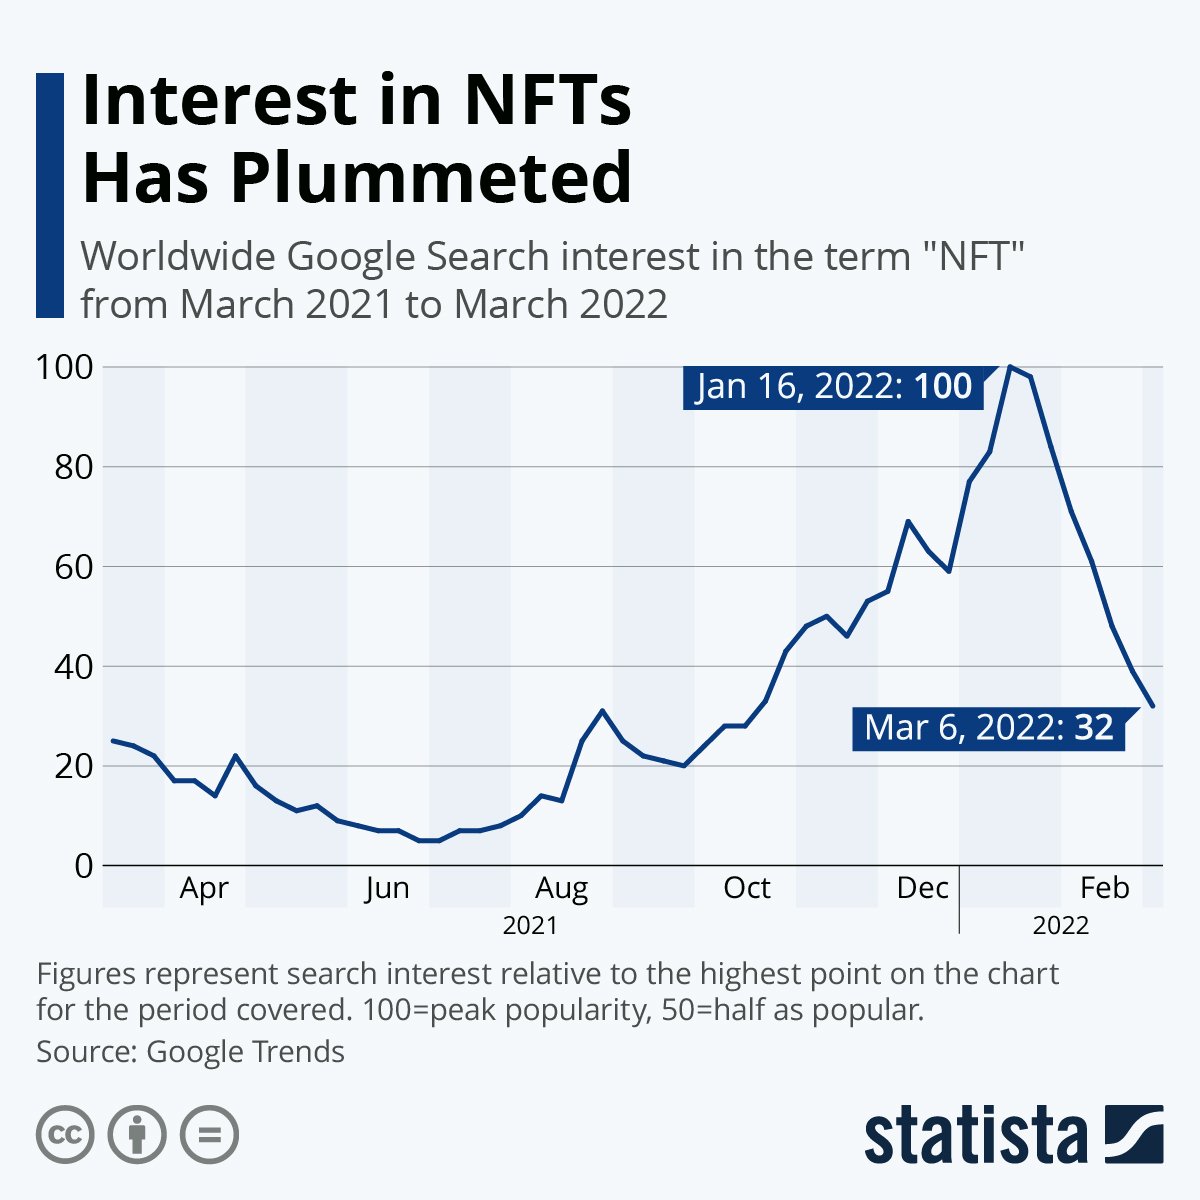 This chart shows Google Search interest in 'NFT' in 2021 and 2022